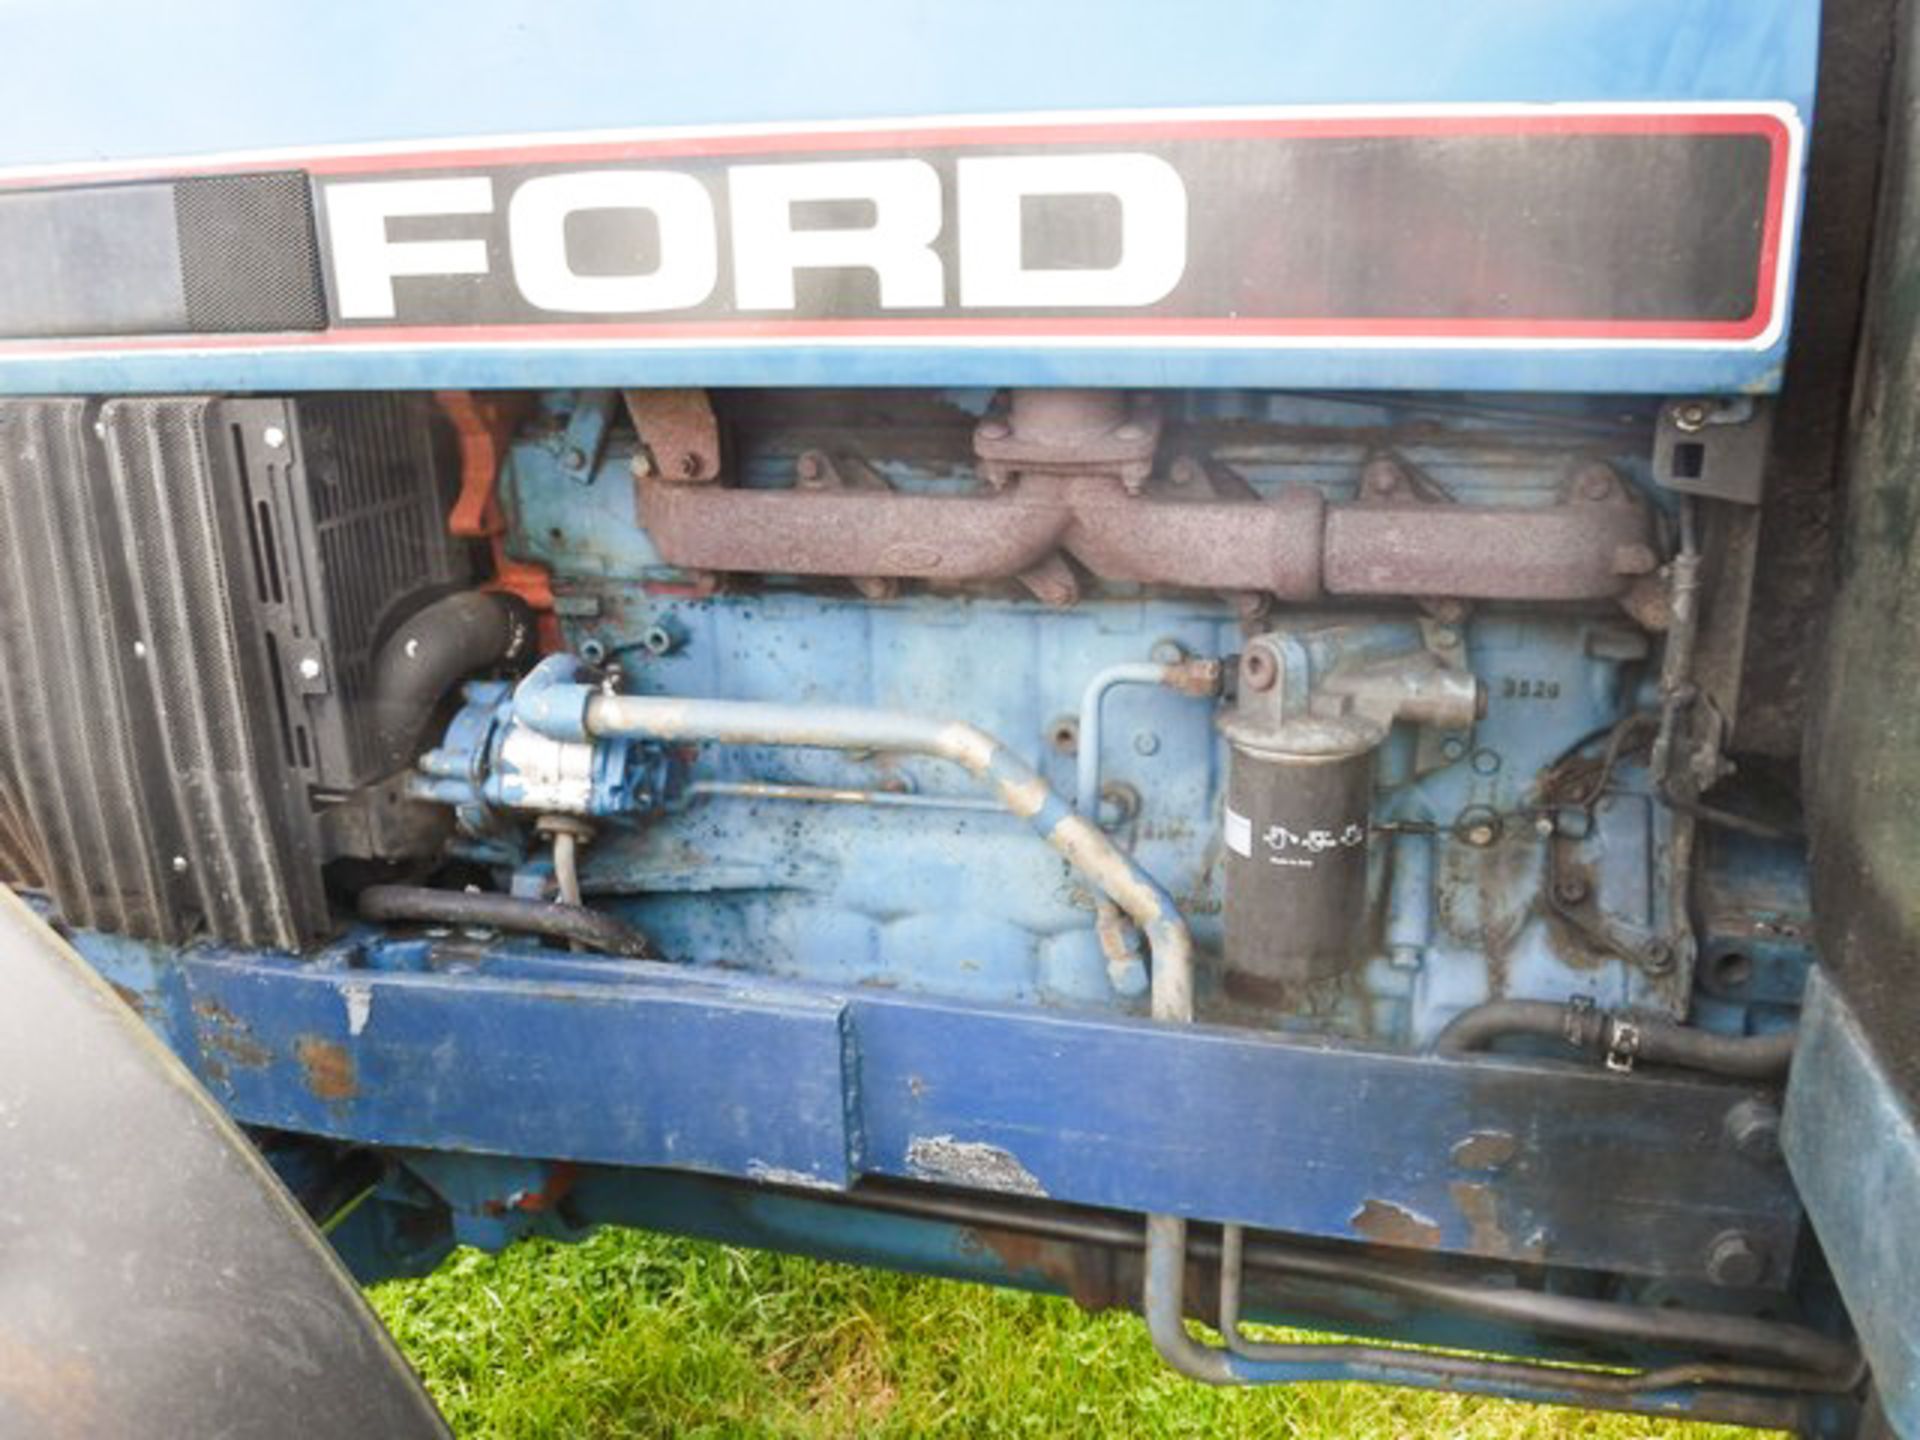 FORD 7840, REG L881PES, S/N 13053573, 13531HRS (NOT VERIFIED) CLOCK INOP, FRONT LINKAGE FITTED BY OW - Image 9 of 19